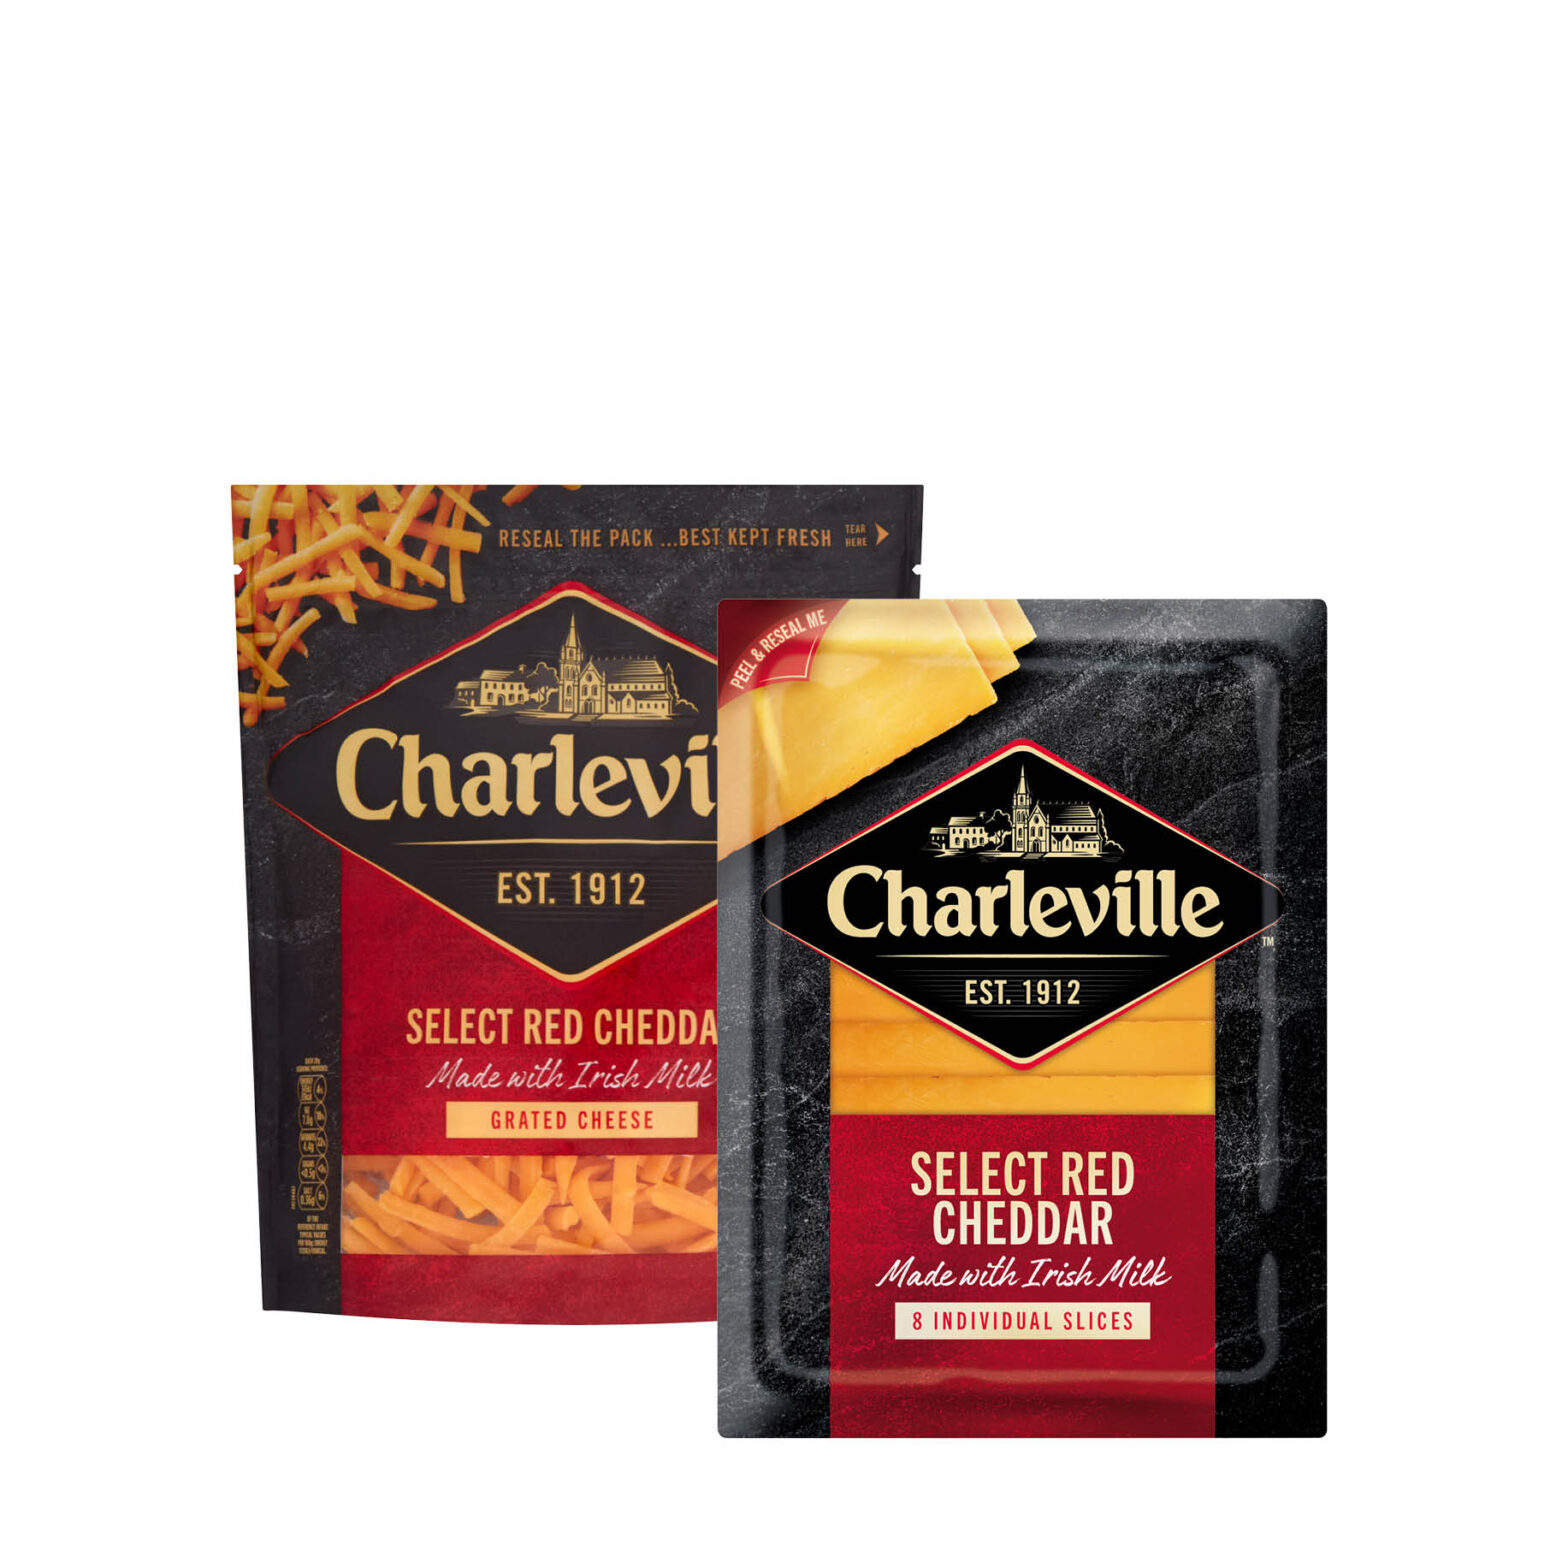 Charleville Red Grated Cheddar Cheese / Charleville Select Sliced Red Cheddar Cheese